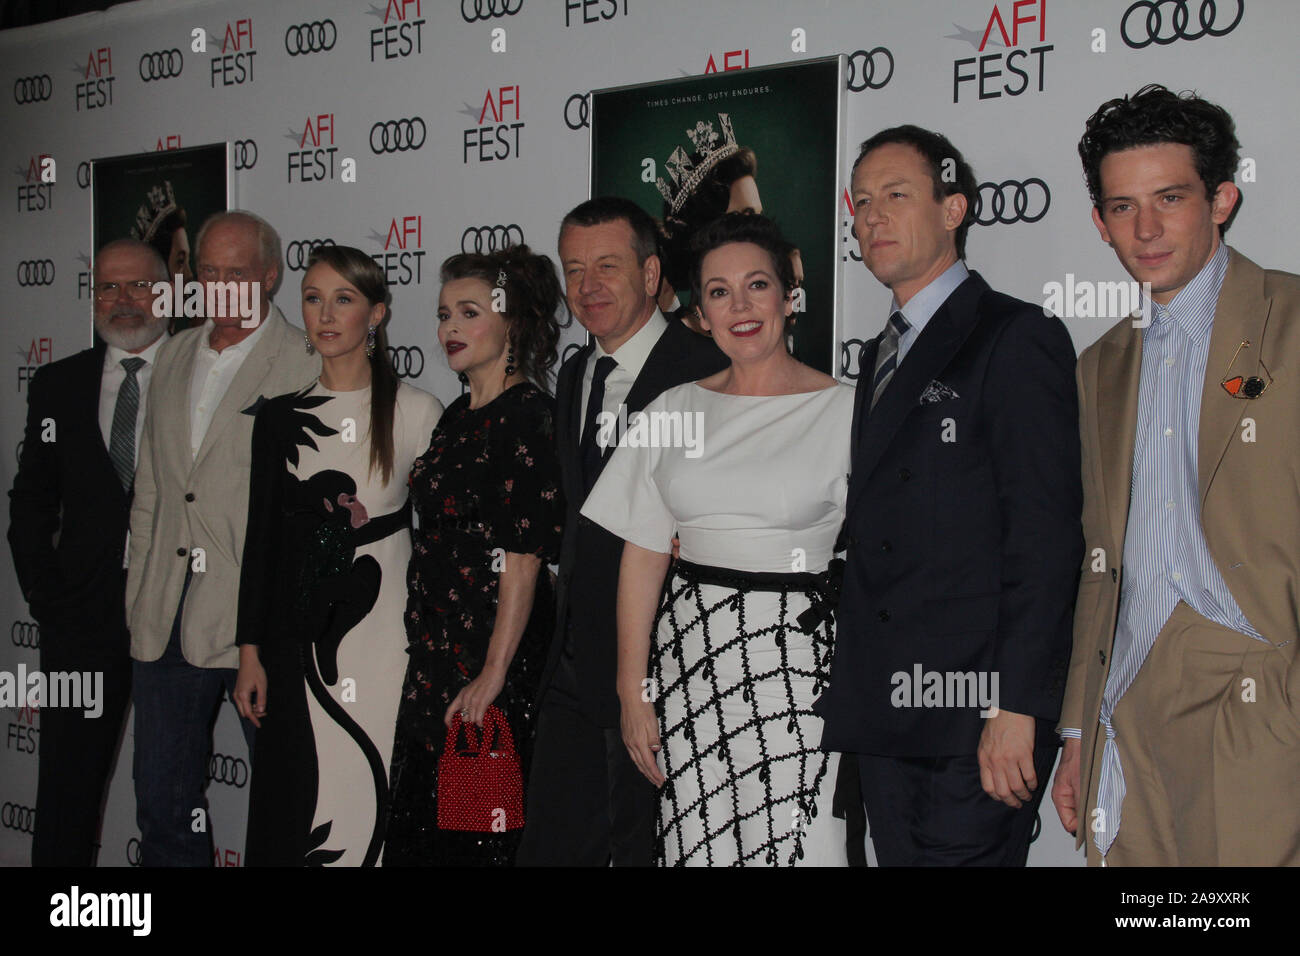 Los Angeles, USA. 16th Nov, 2019. Charles Dance, Erin Doherty, Helena Bonham Carter, Peter Morgan, Olivia Colman, Tobias Menzies, Josh O'Connor 11/16/2019 AFI Fest 2019 Gala Screening 'The Crown' held at the TCL Chinese Theater in Los Angeles, CA Credit: Cronos/Alamy Live News Stock Photo